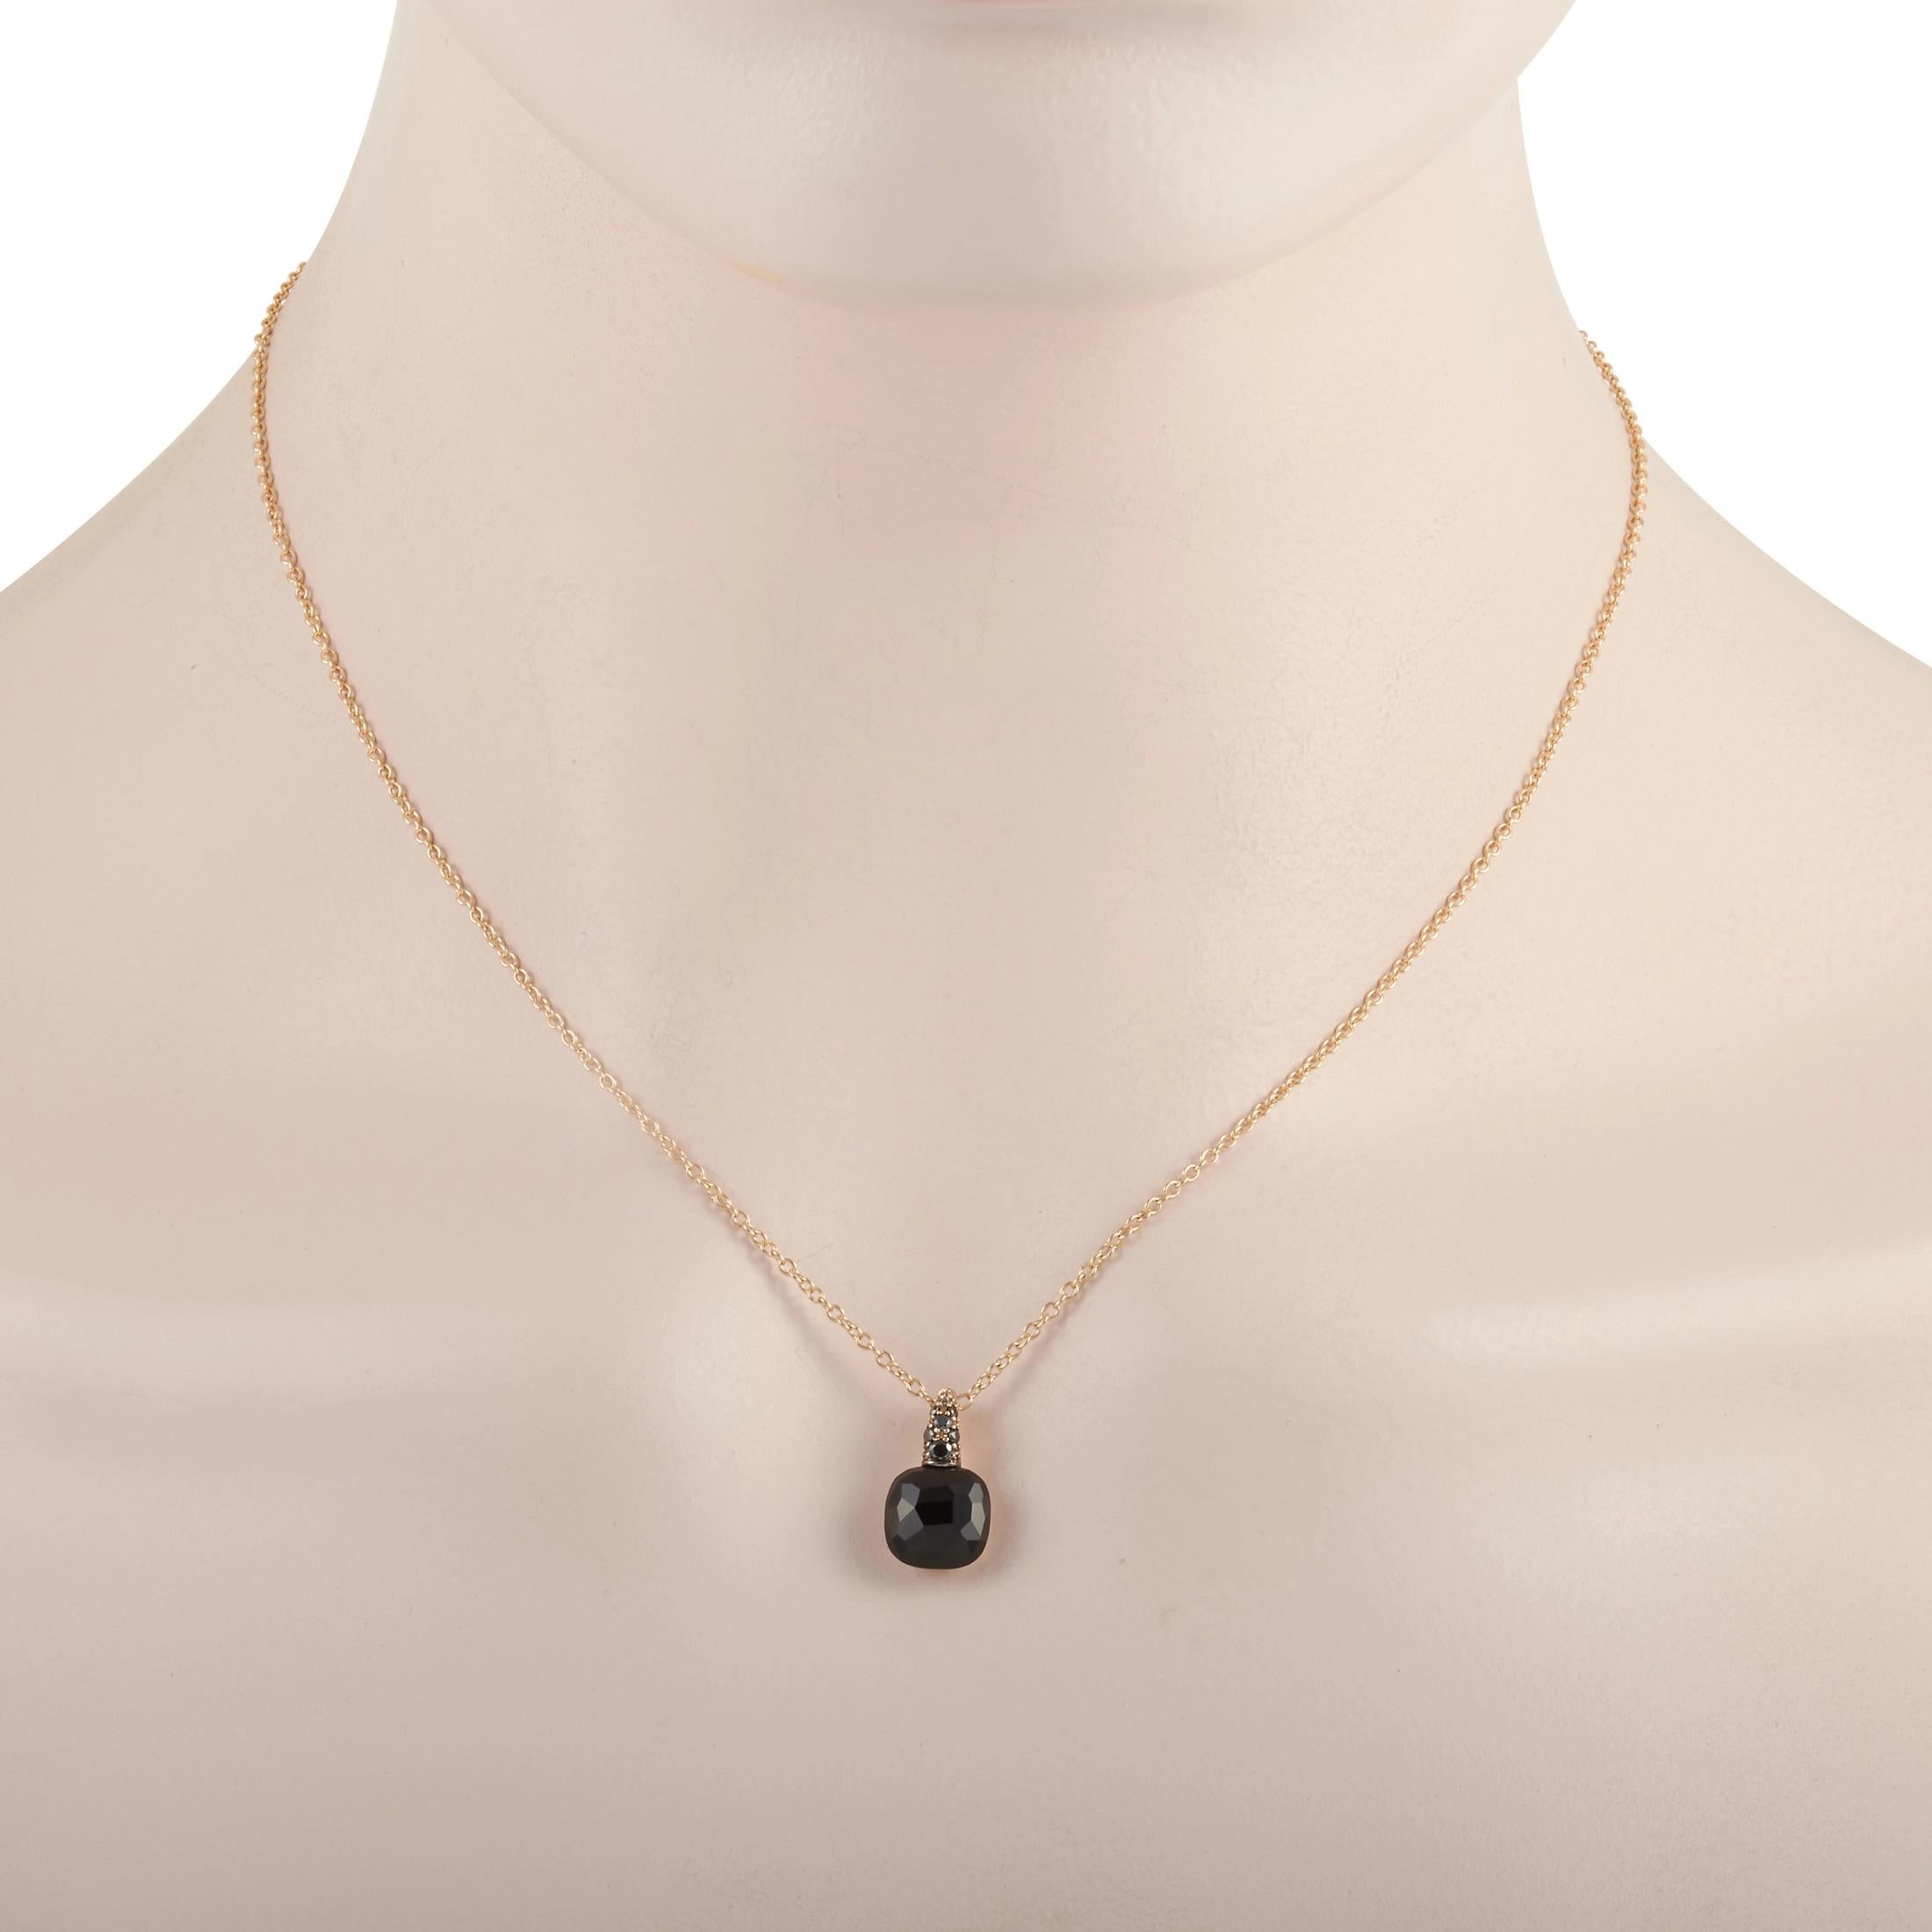 Dramatic and extremely captivating, the Pomellato 18K Yellow Gold Diamond and Black Onyx Necklace will charm you with its faceted black onyx pendant suspending from a bail covered in treated black diamonds. Holding the bewitching pendant is 17 inch